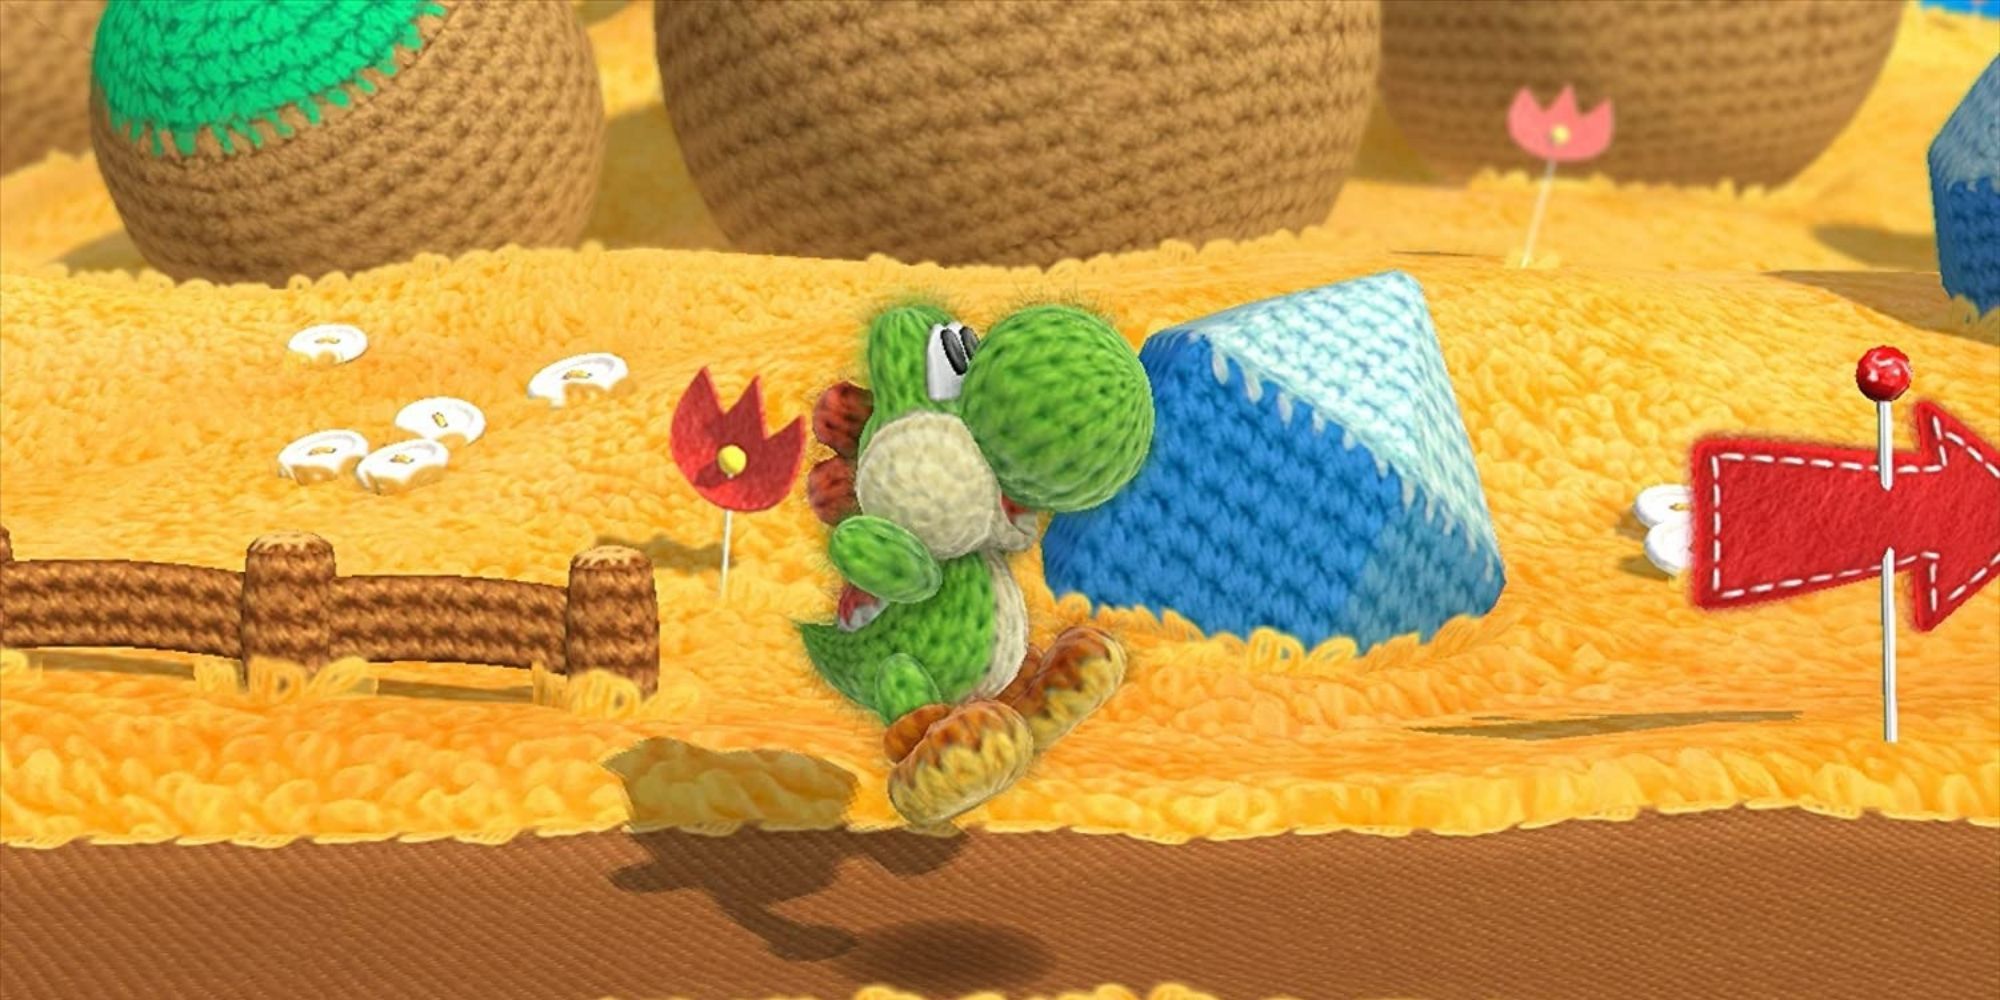 Knitted Yoshi from Yoshi's Woolly World, he is jumping in the air at the start of a level.